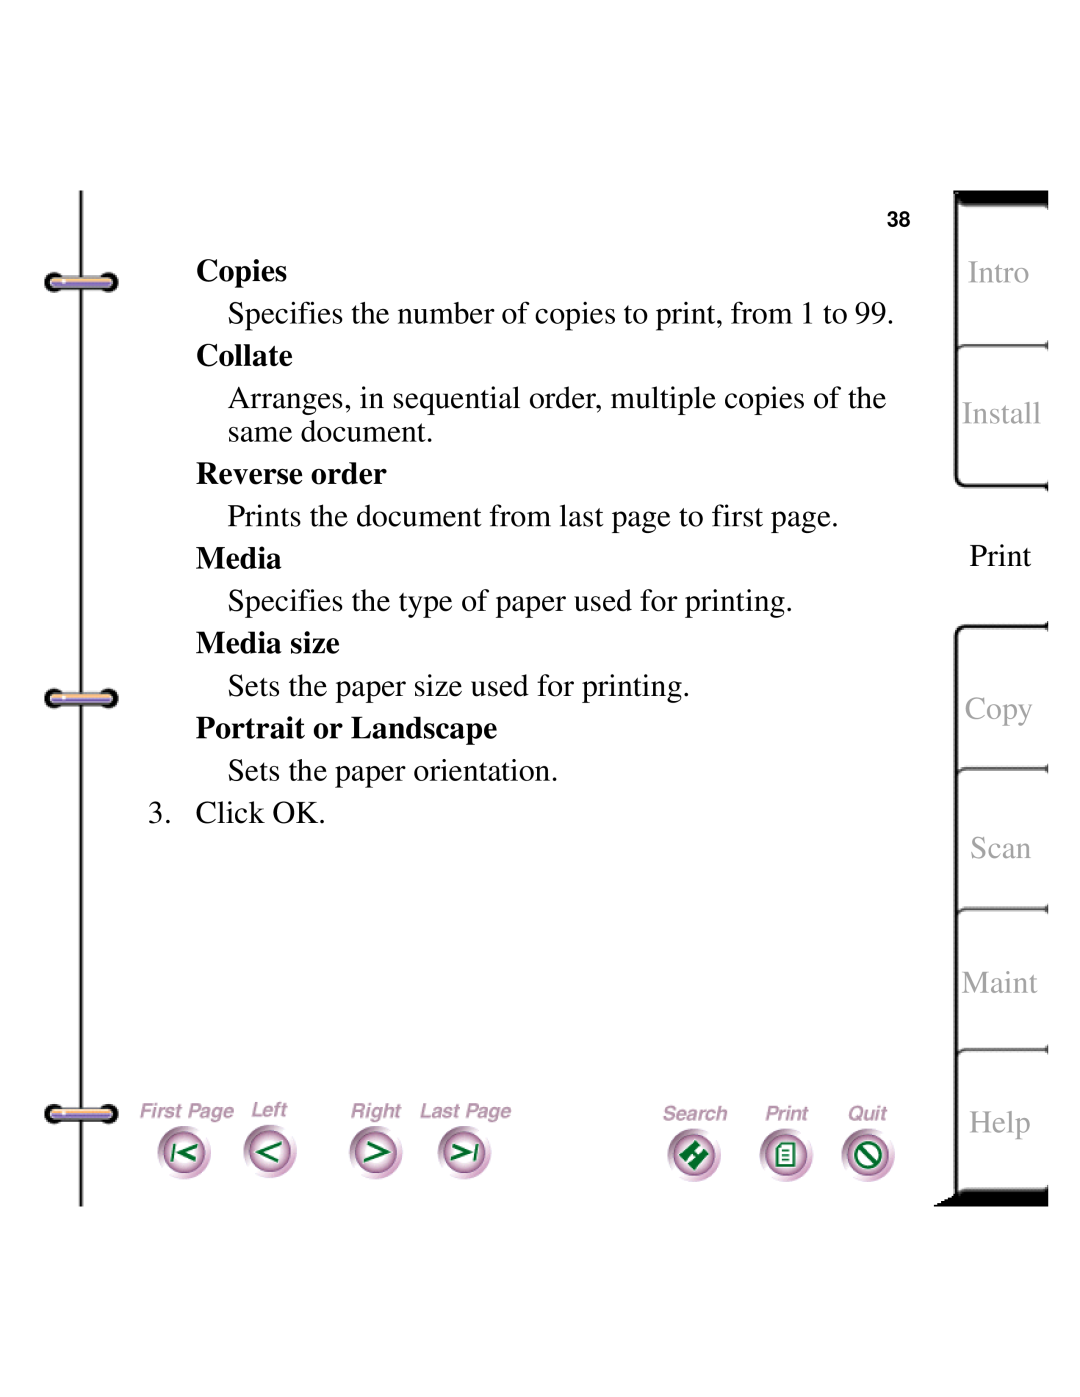 Xerox Document HomeCentre Copies, Collate, Reverse order, Prints the document from last page to first page, Media, Help 